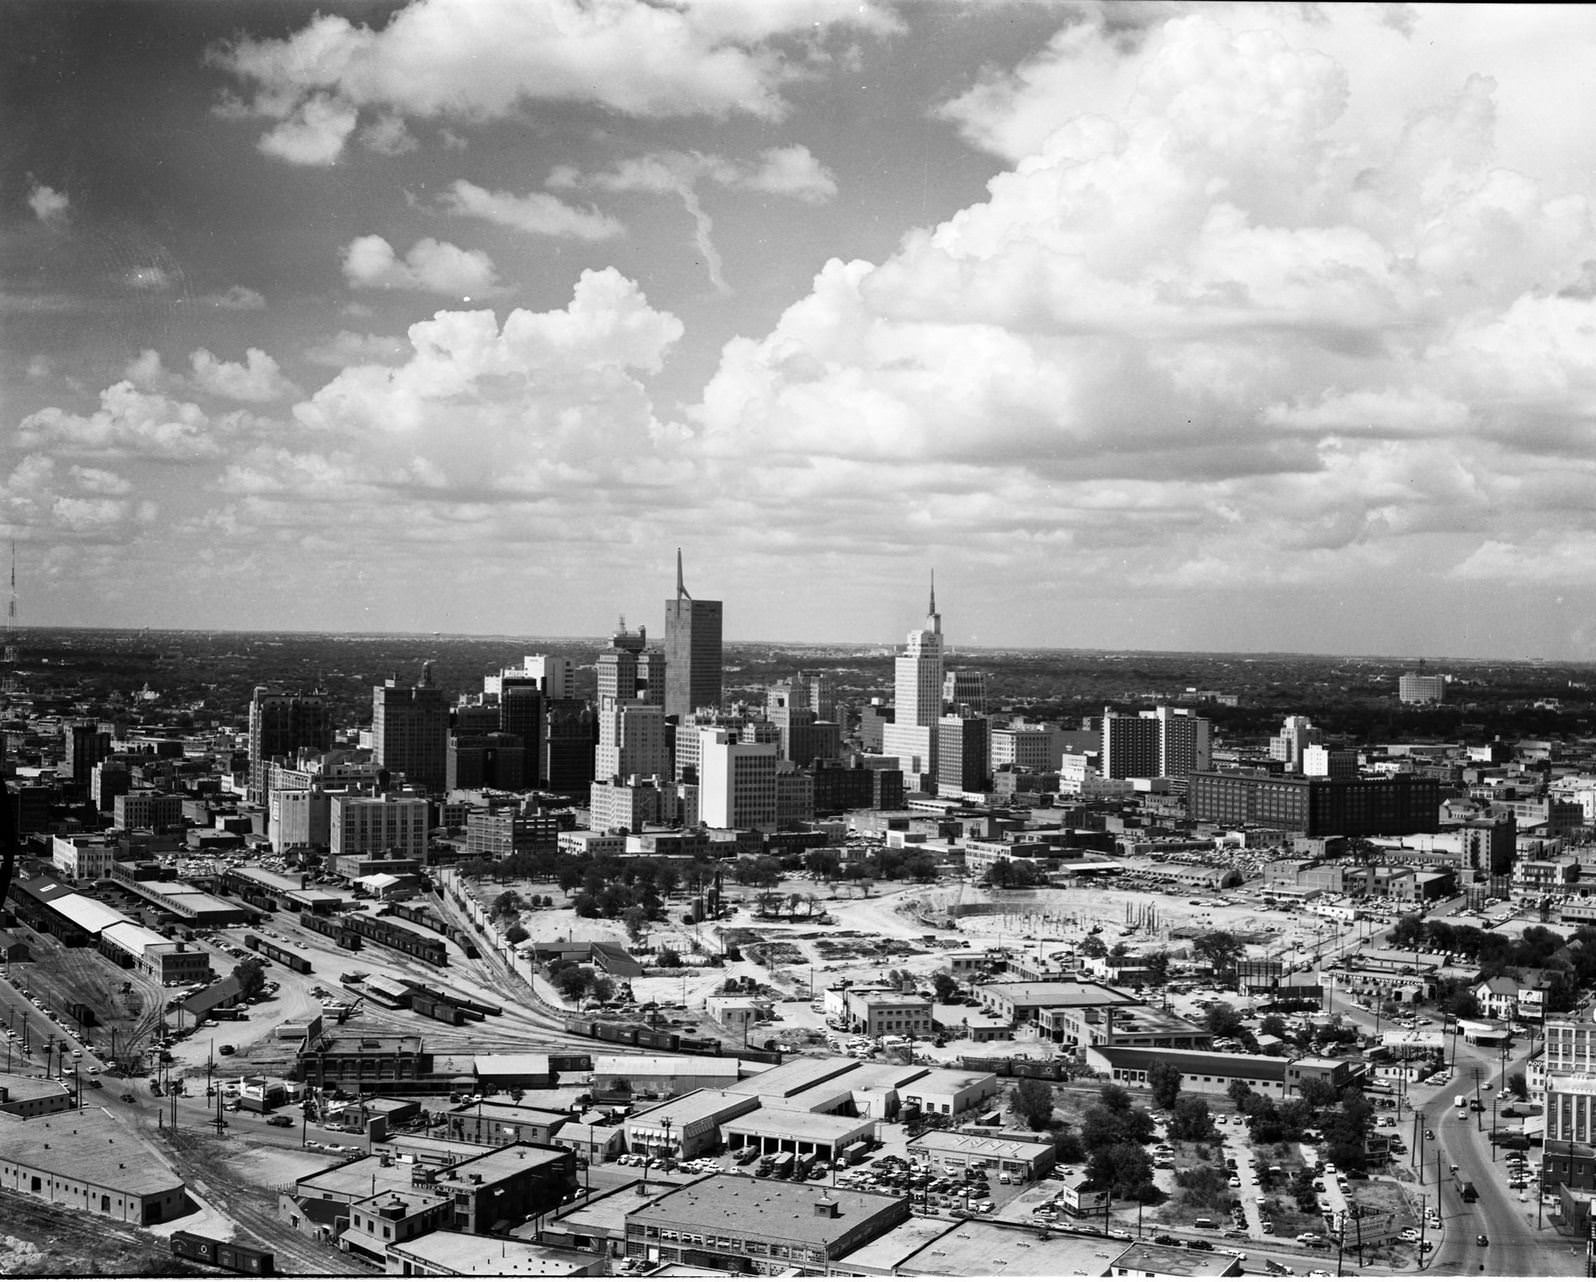 Skyline view of downtown Dallas, Texas looking north from the southside, showing a railroad yard in the foreground, 1955